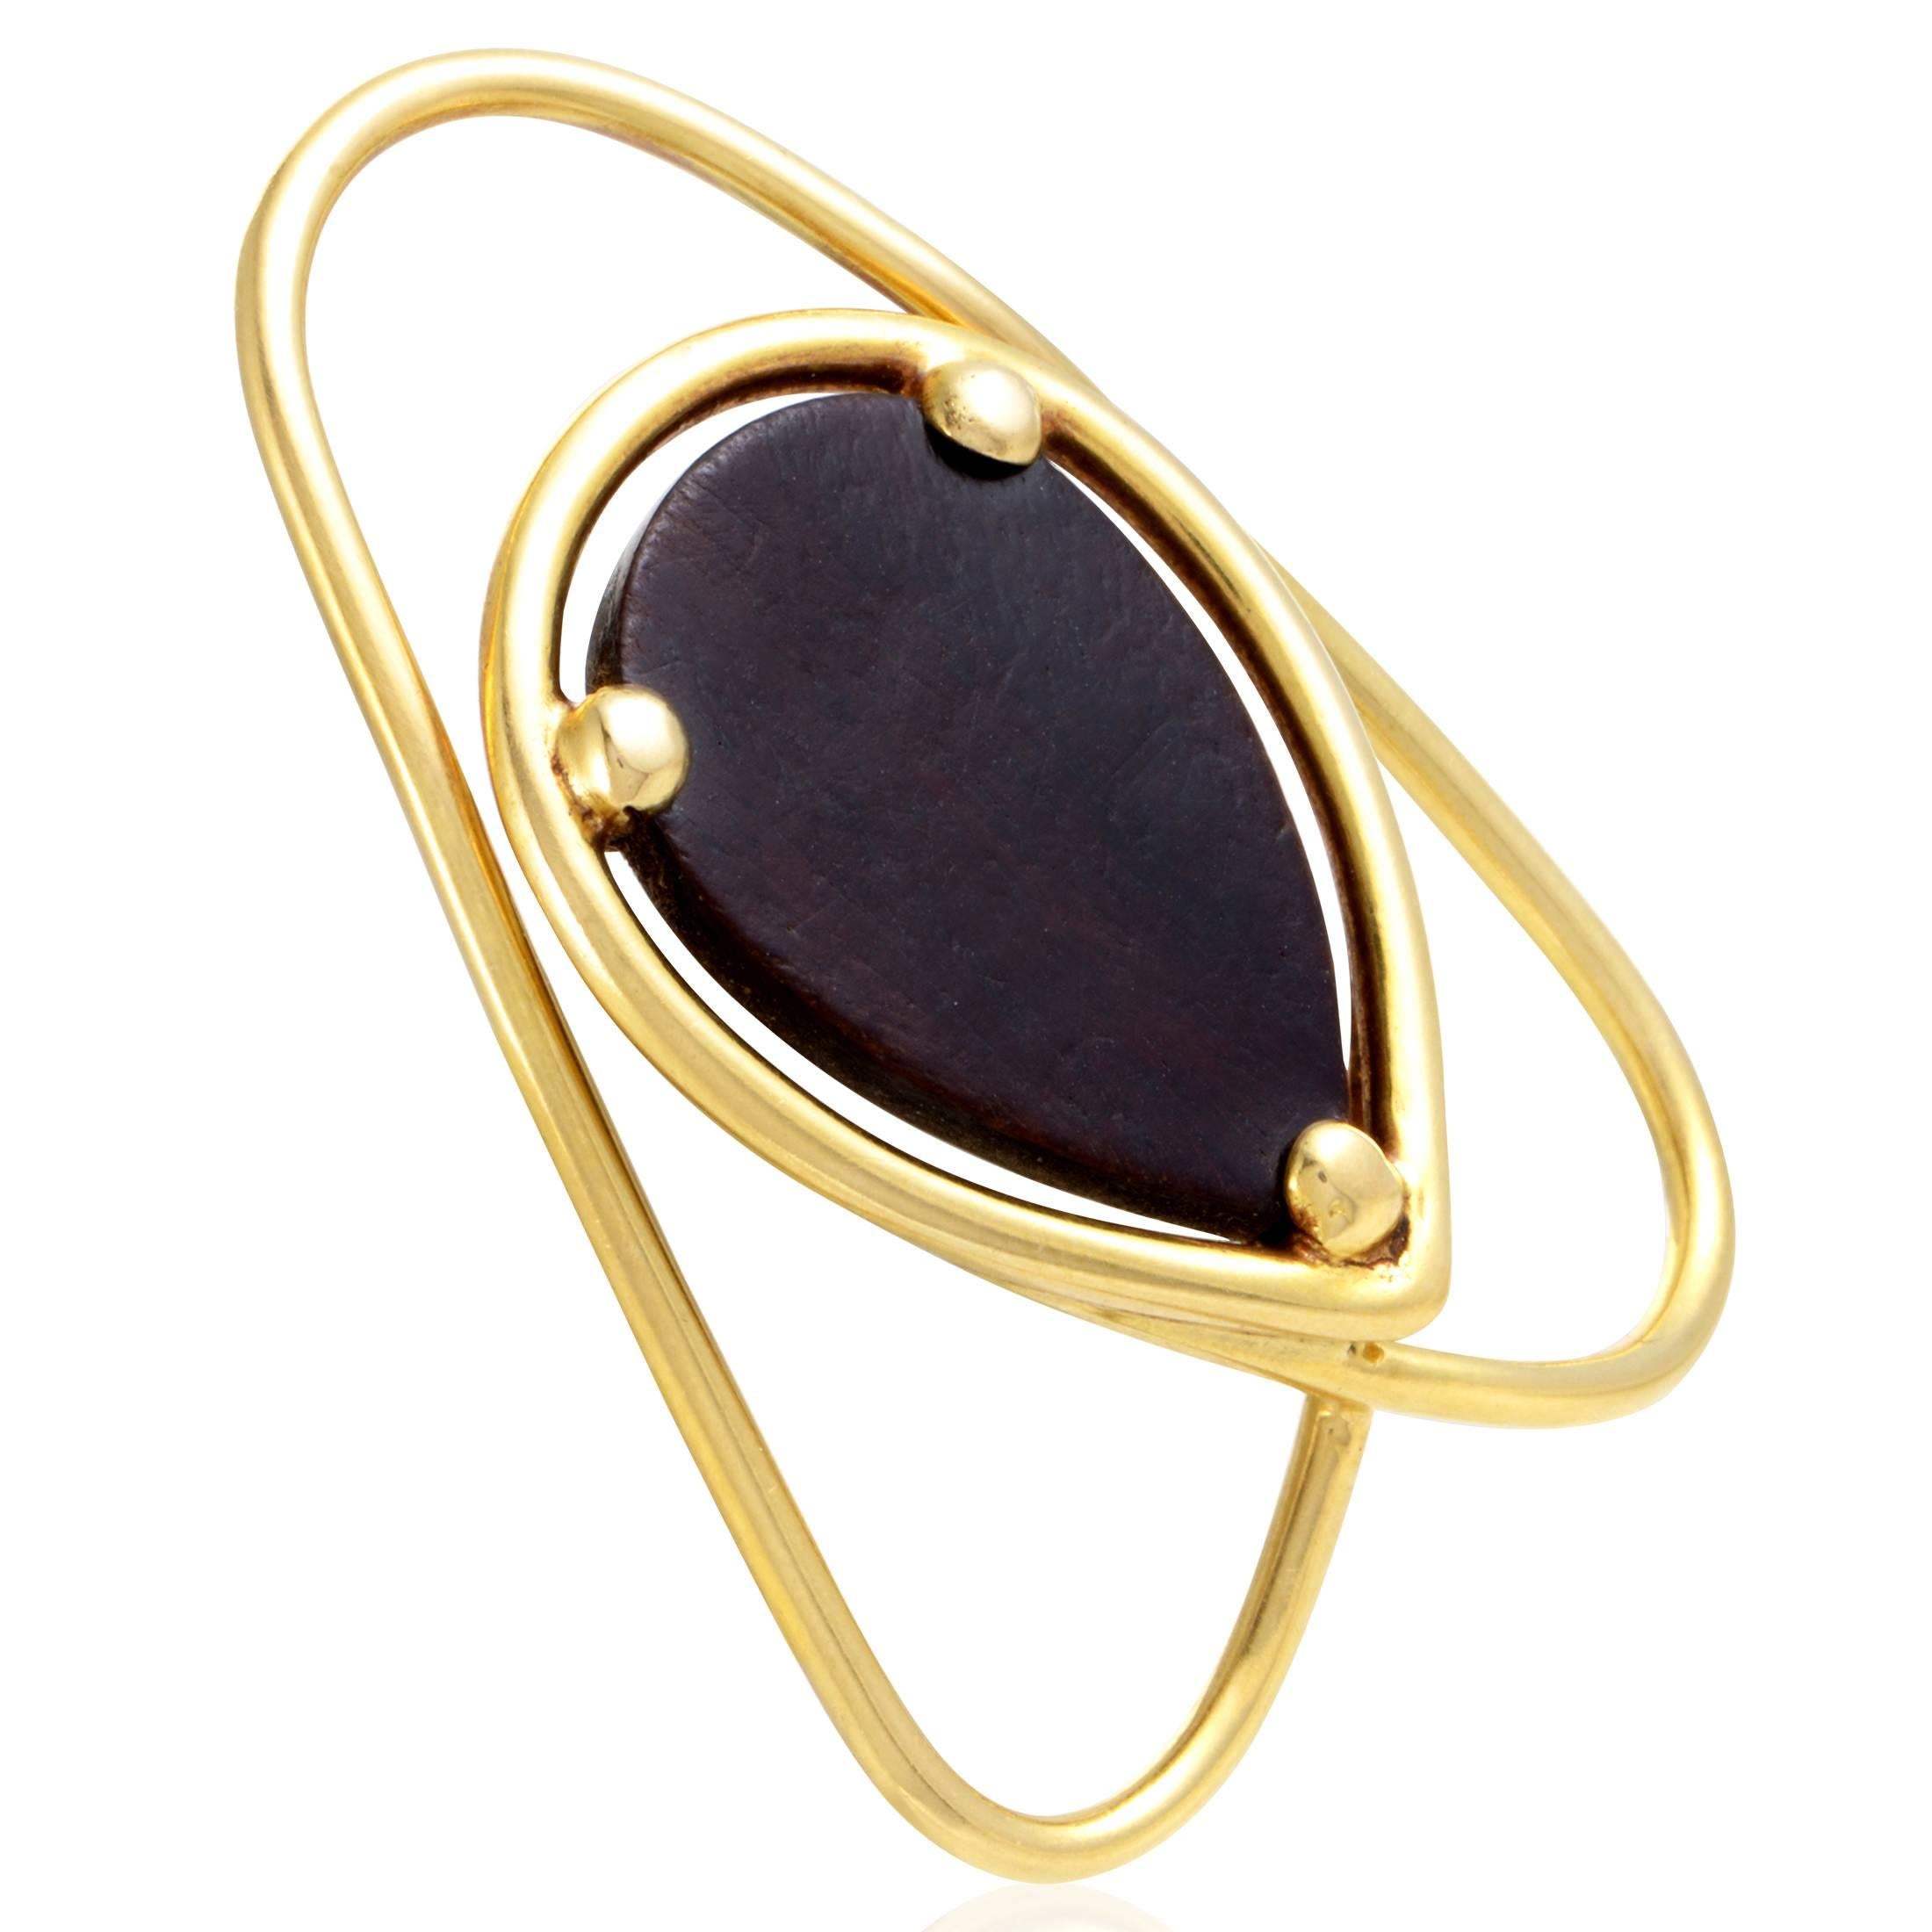 Drawing attention to the magnificent appeal and captivating darkness of the stunning ebony wood, Van Cleef & Arpels employed the minimalist shape and immaculate gleam of 18K yellow gold to a splendid effect in this outstanding money